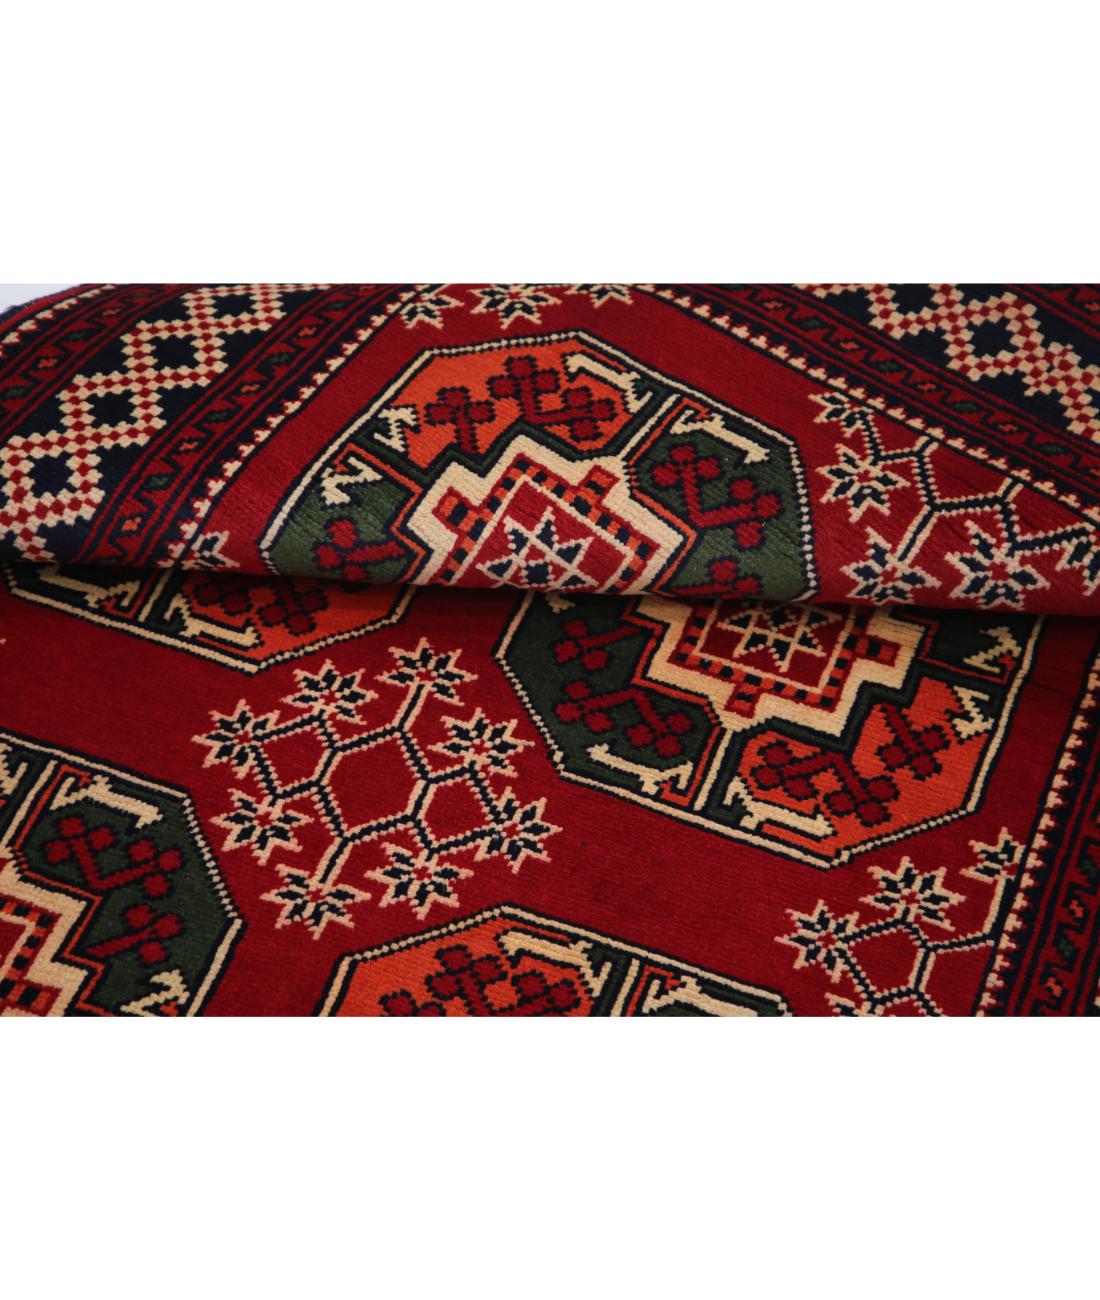 Afghan 3' 4" X 4' 8" Hand-Knotted Wool Rug 3' 4" X 4' 8" (102 X 142) / Red / Black